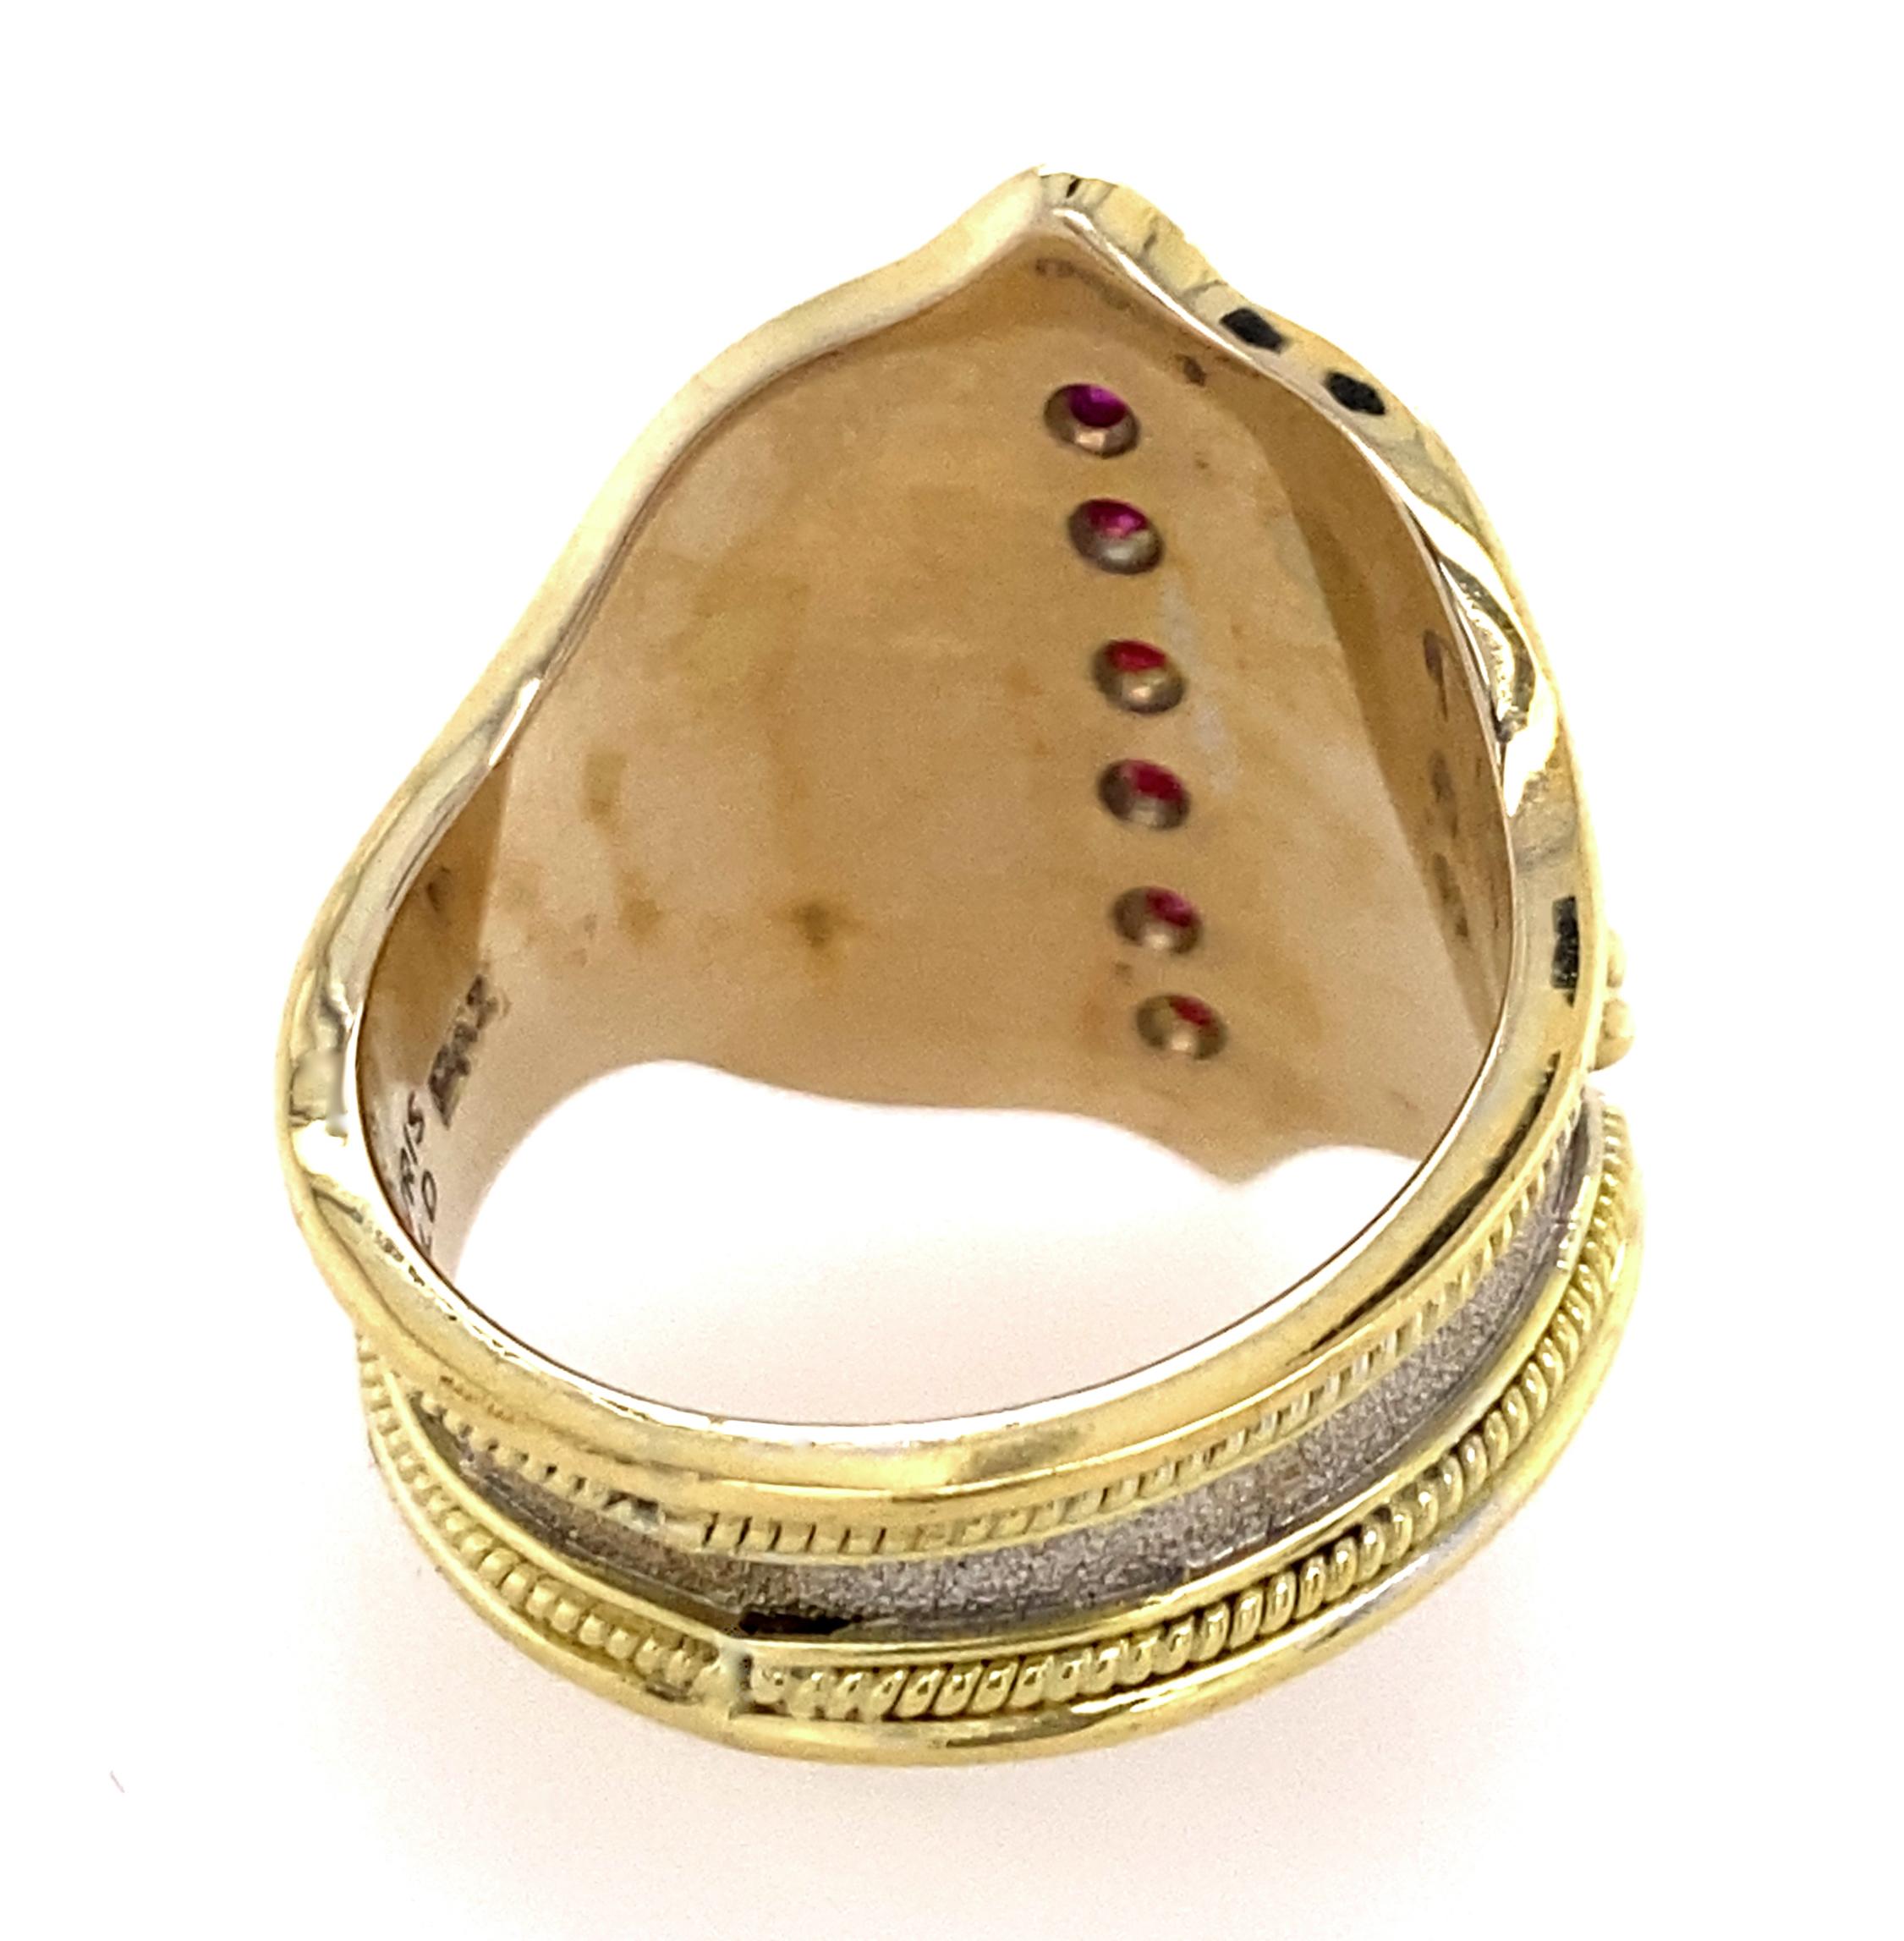 Cigar Band or Shield Ring in 18K Gold with Carré-Cut Rubies & Granulation Detail 2